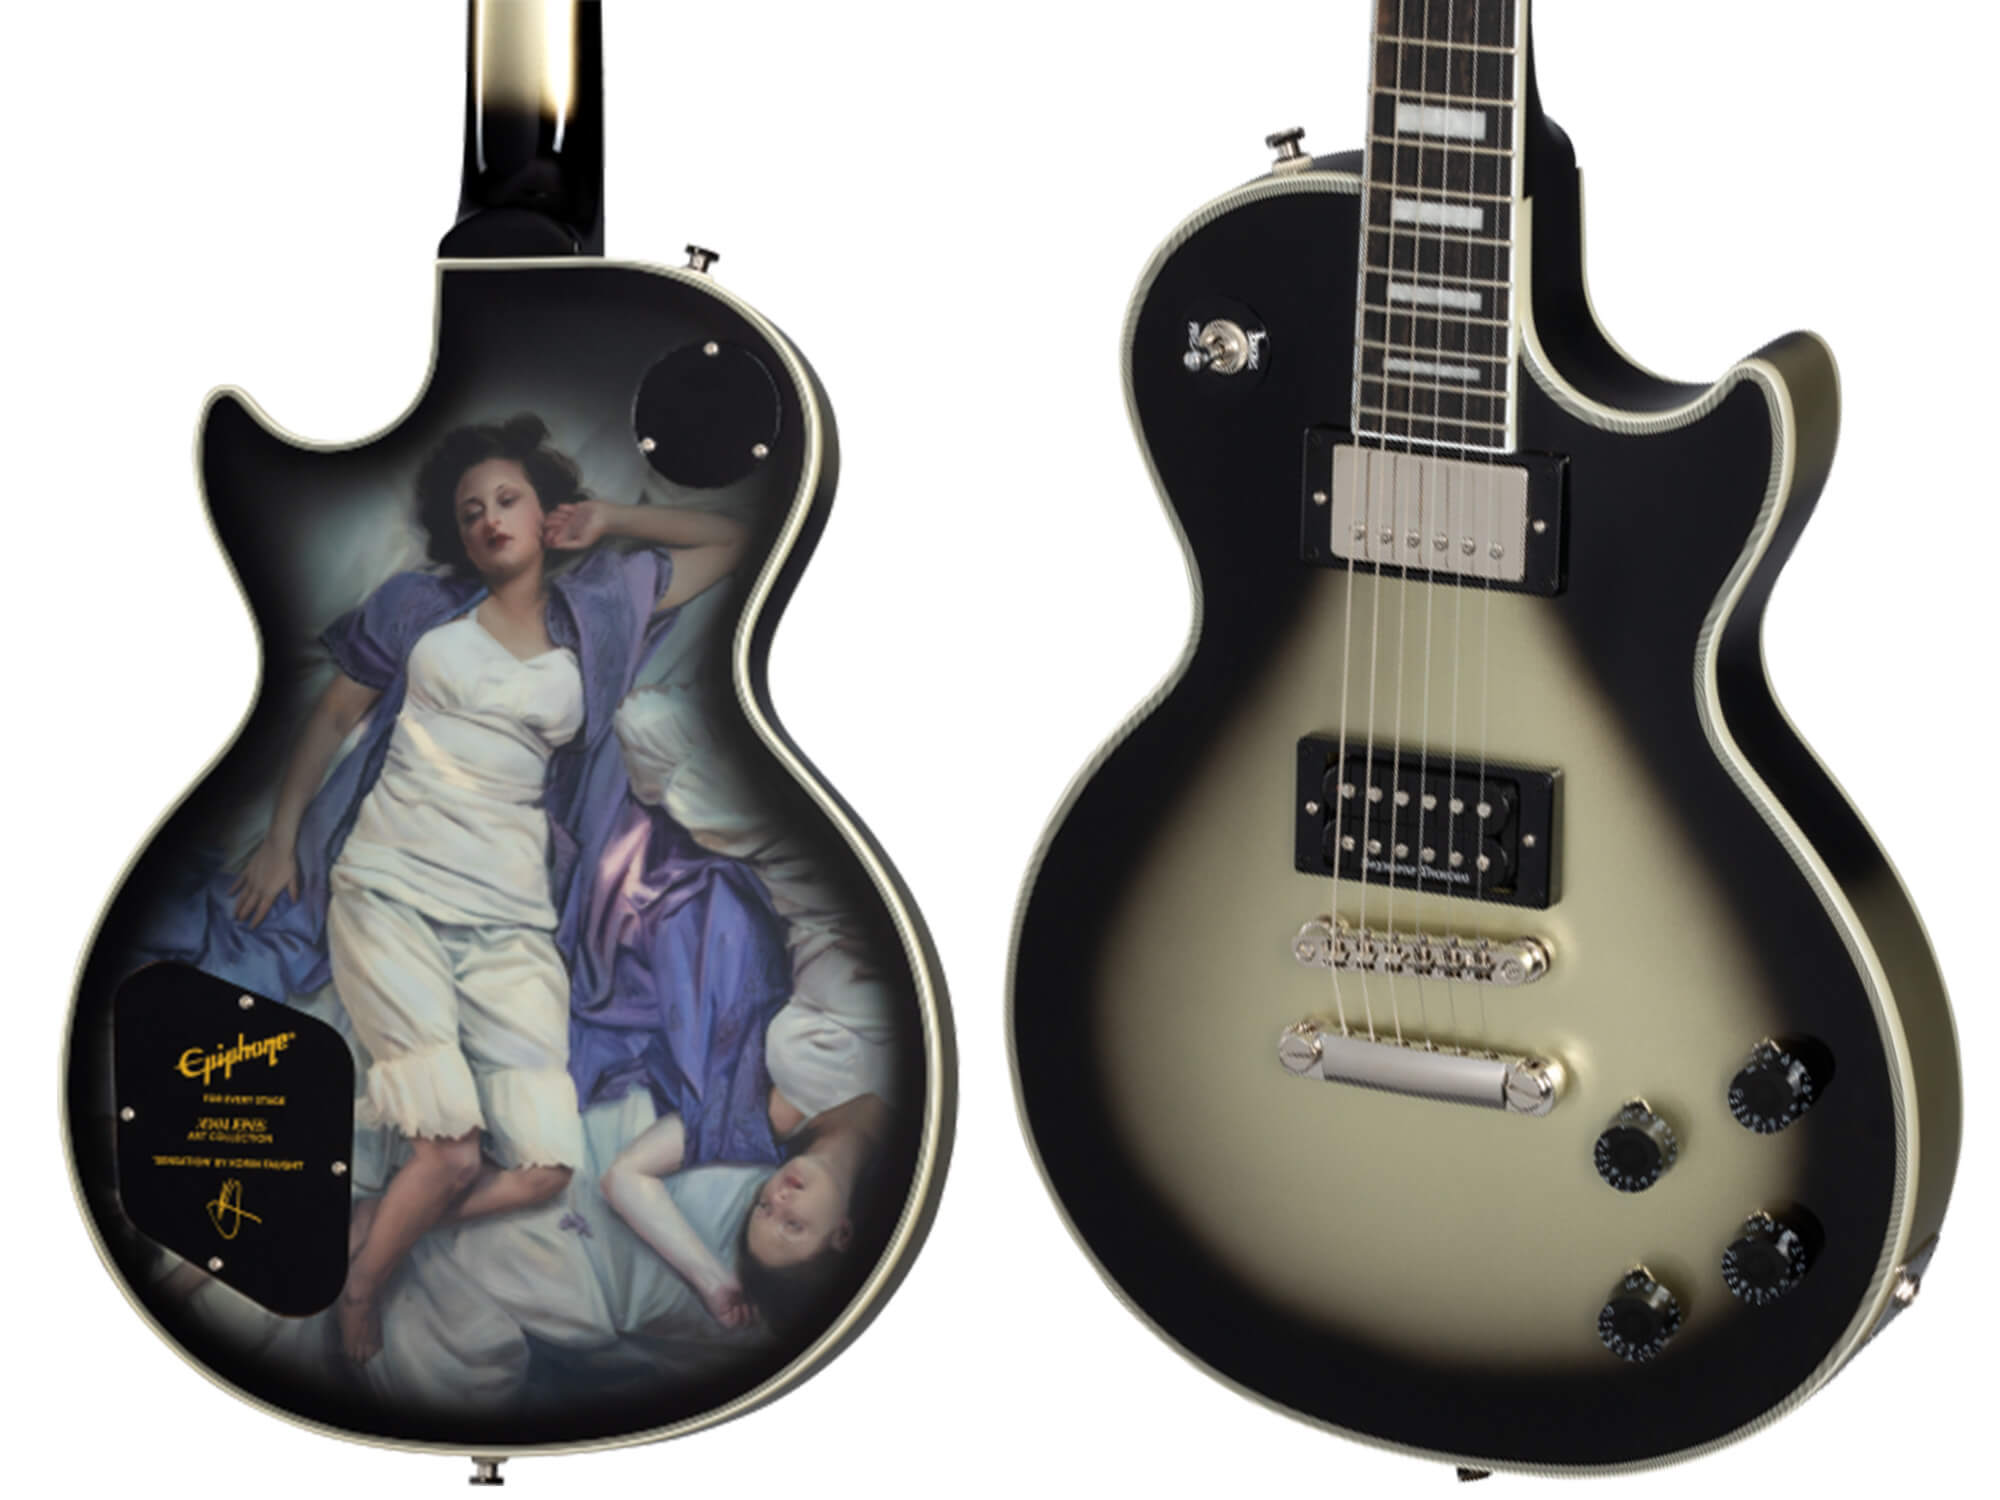 Epiphone Adam Jones model featuring "sensation" artwork - it is a silver burst Les Paul, and the painting on the back depicts a woman lying on a bed looking sad